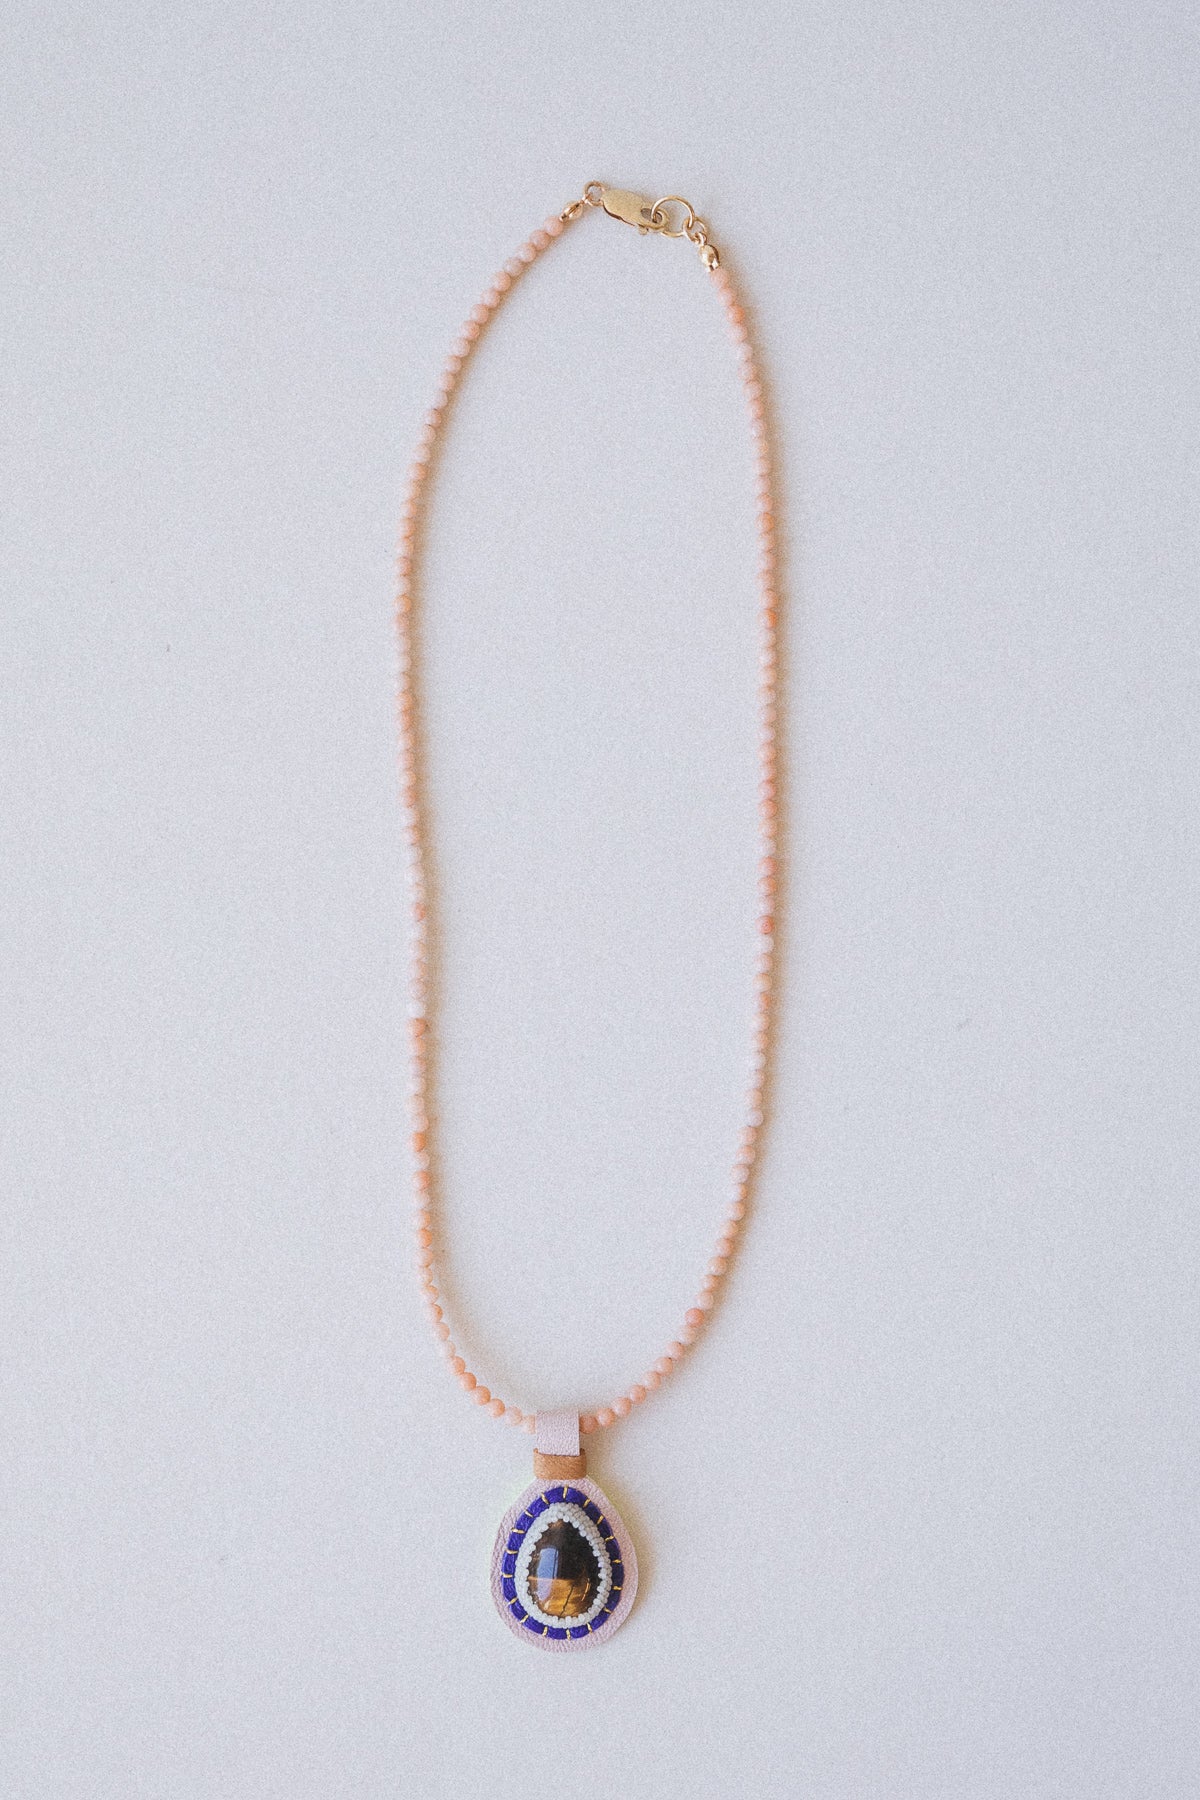 PINK AVENTURINE NECKLACE WITH A TIGER EYE TEARDROP PENDANT